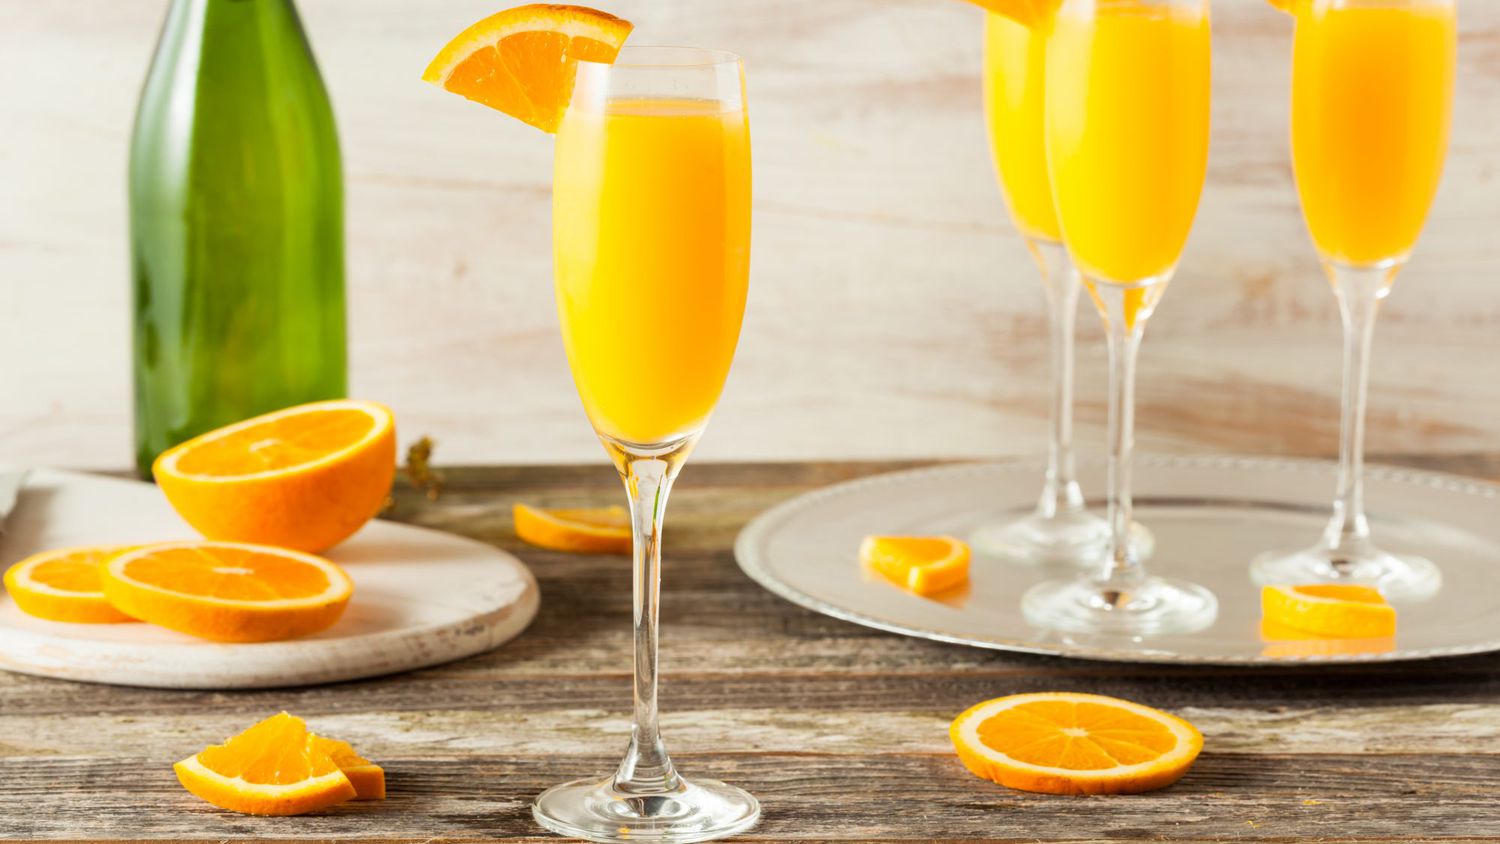 How to Make the Most Fresh-Tasting Mimosa